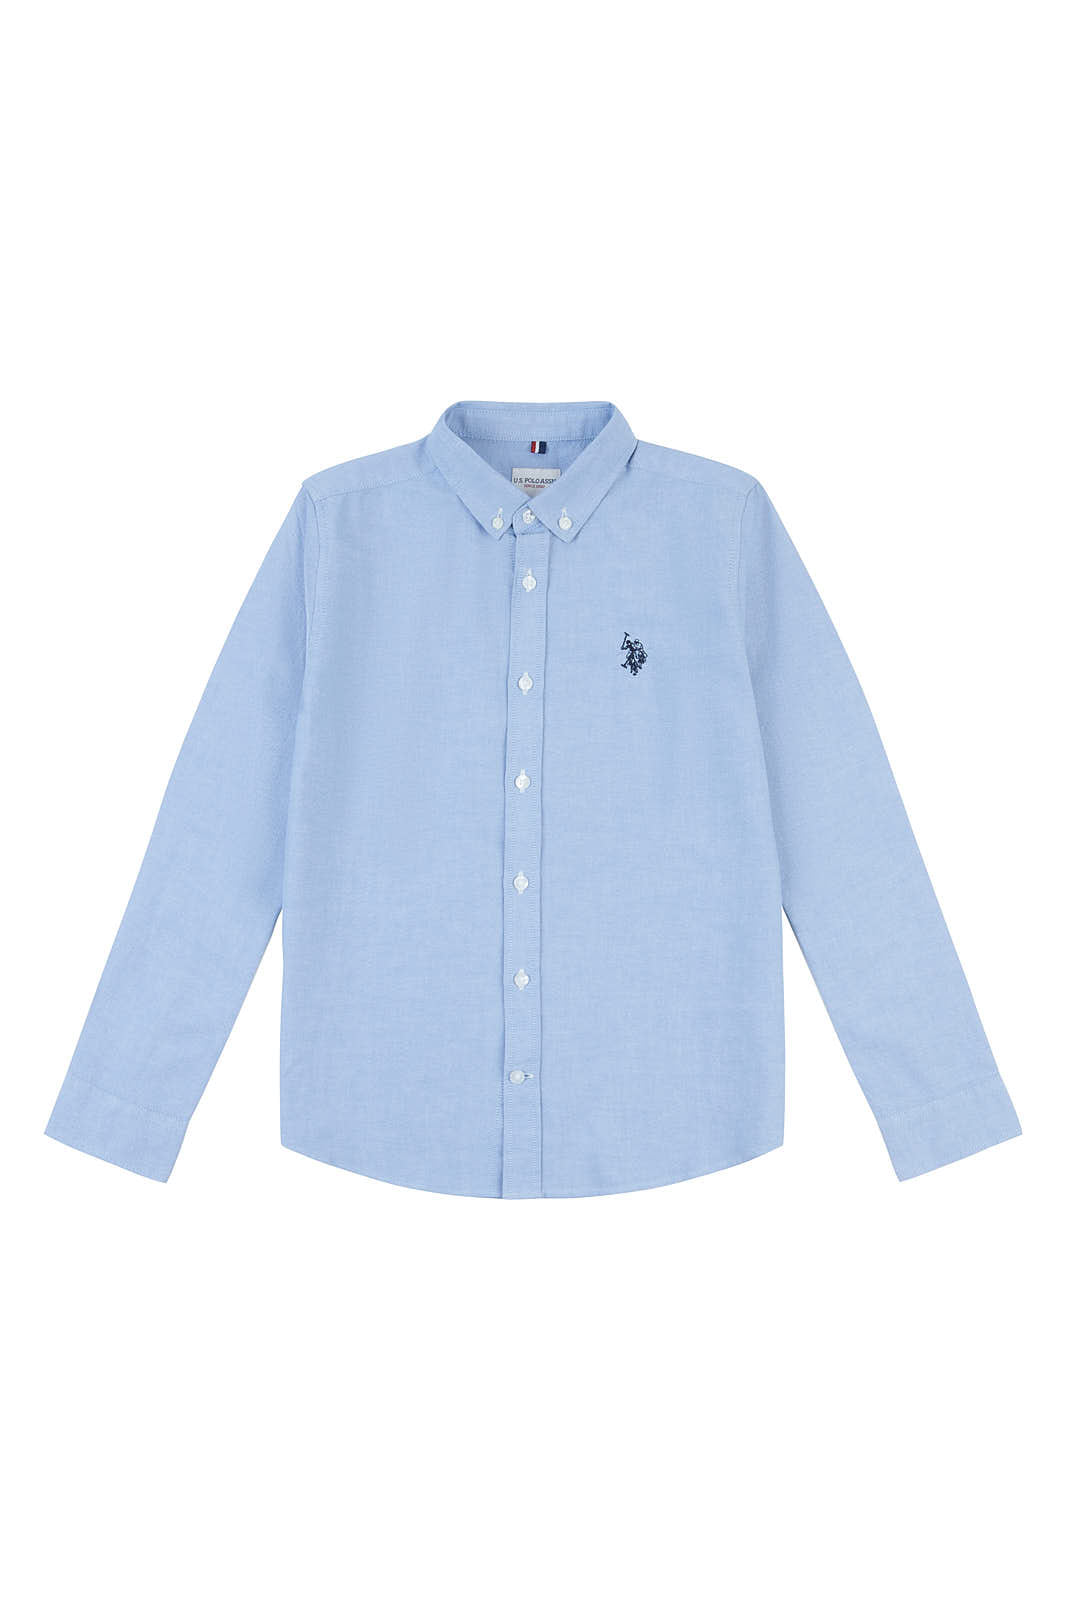 U.S. Polo Assn. Boys Peached Oxford Shirt in Blue Yonder